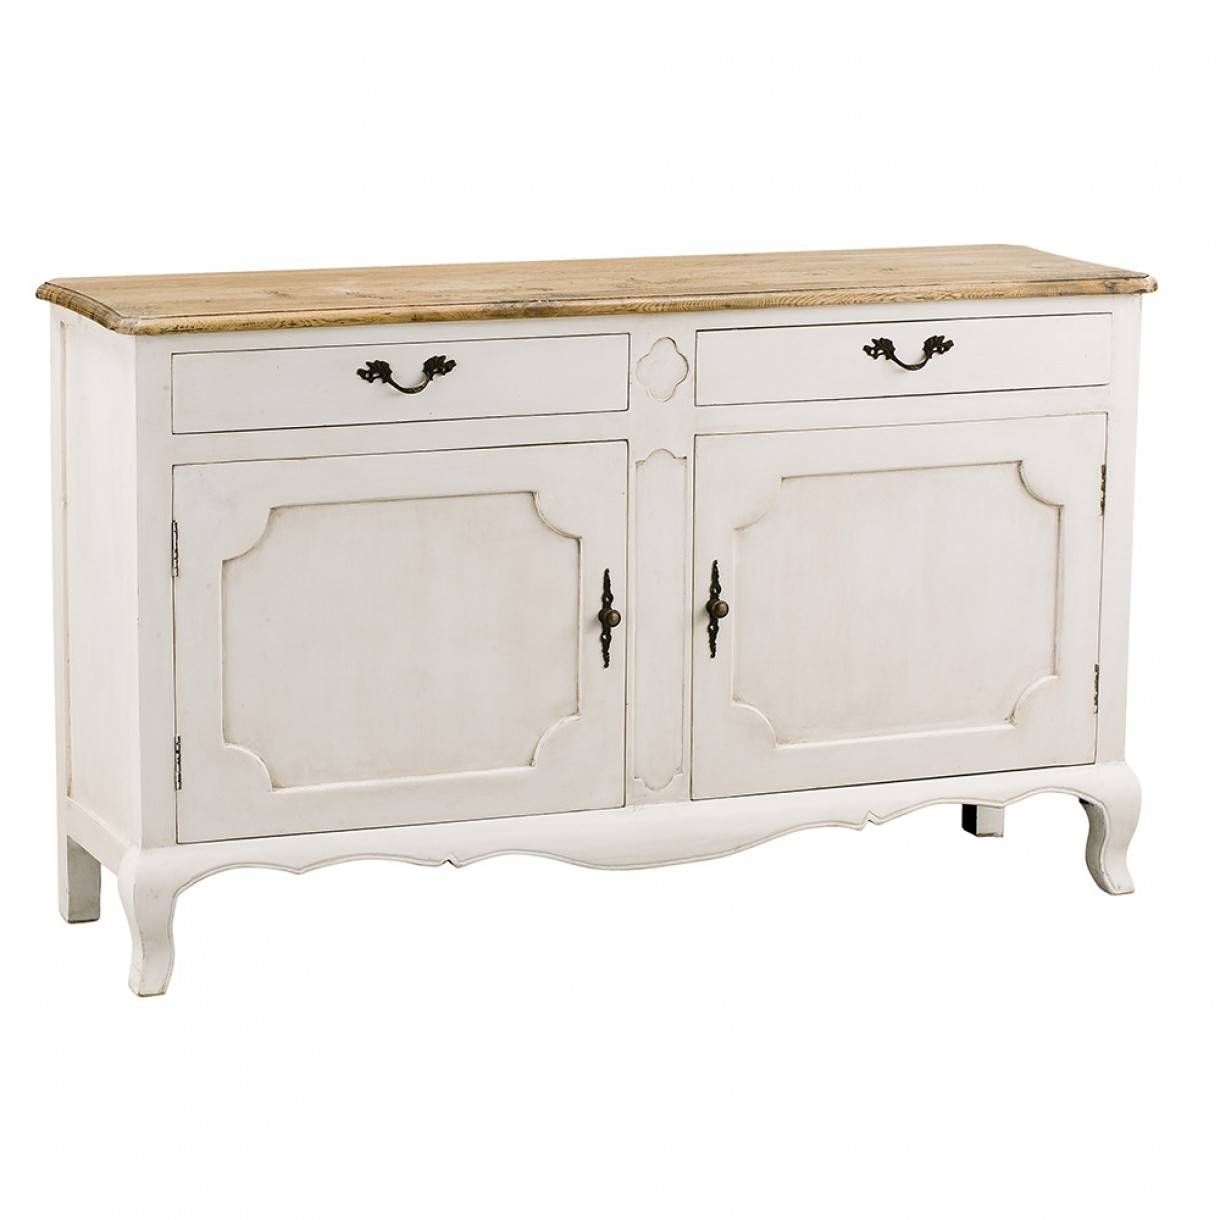 Sideboards: Marvellous White Sideboards Furniture Distressed White In Small White Sideboards (View 9 of 30)